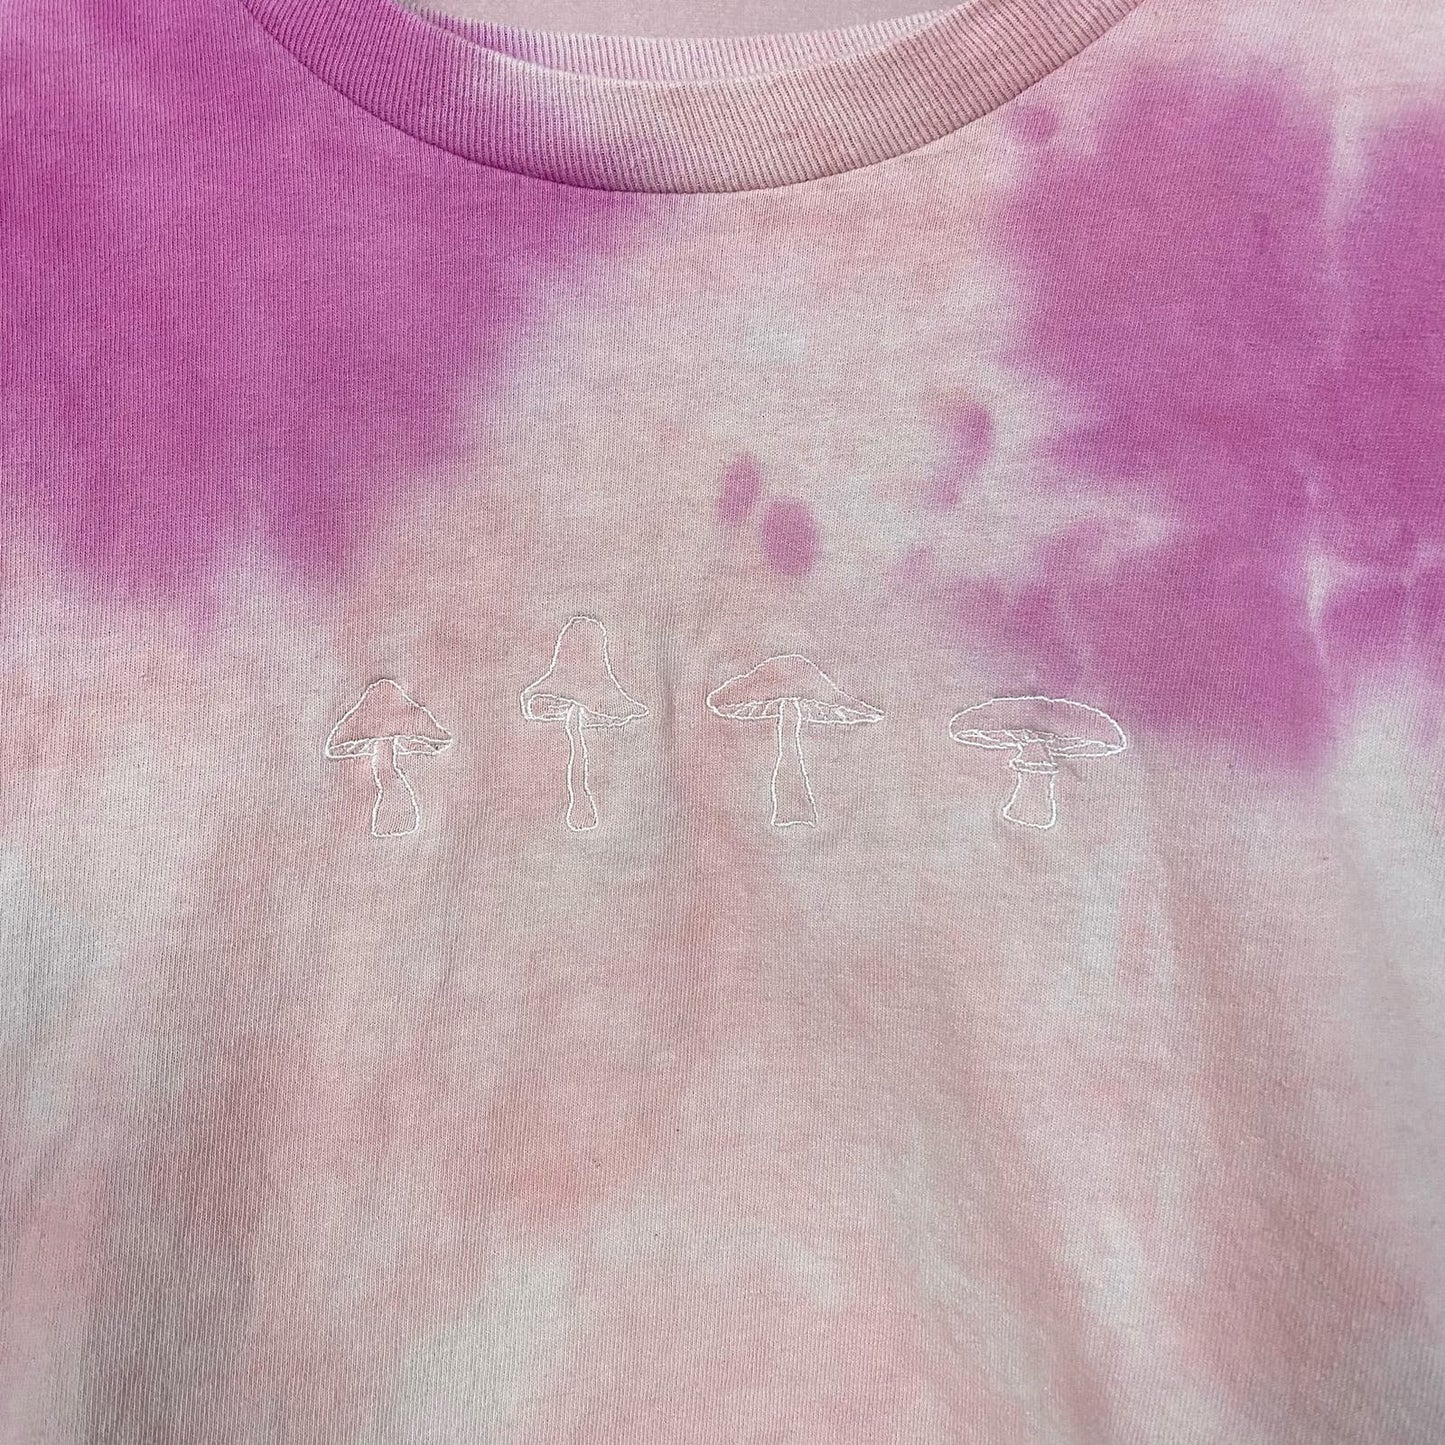 Upcycled PacSun Mushroom Tie Dye Crop Tee, Size Small